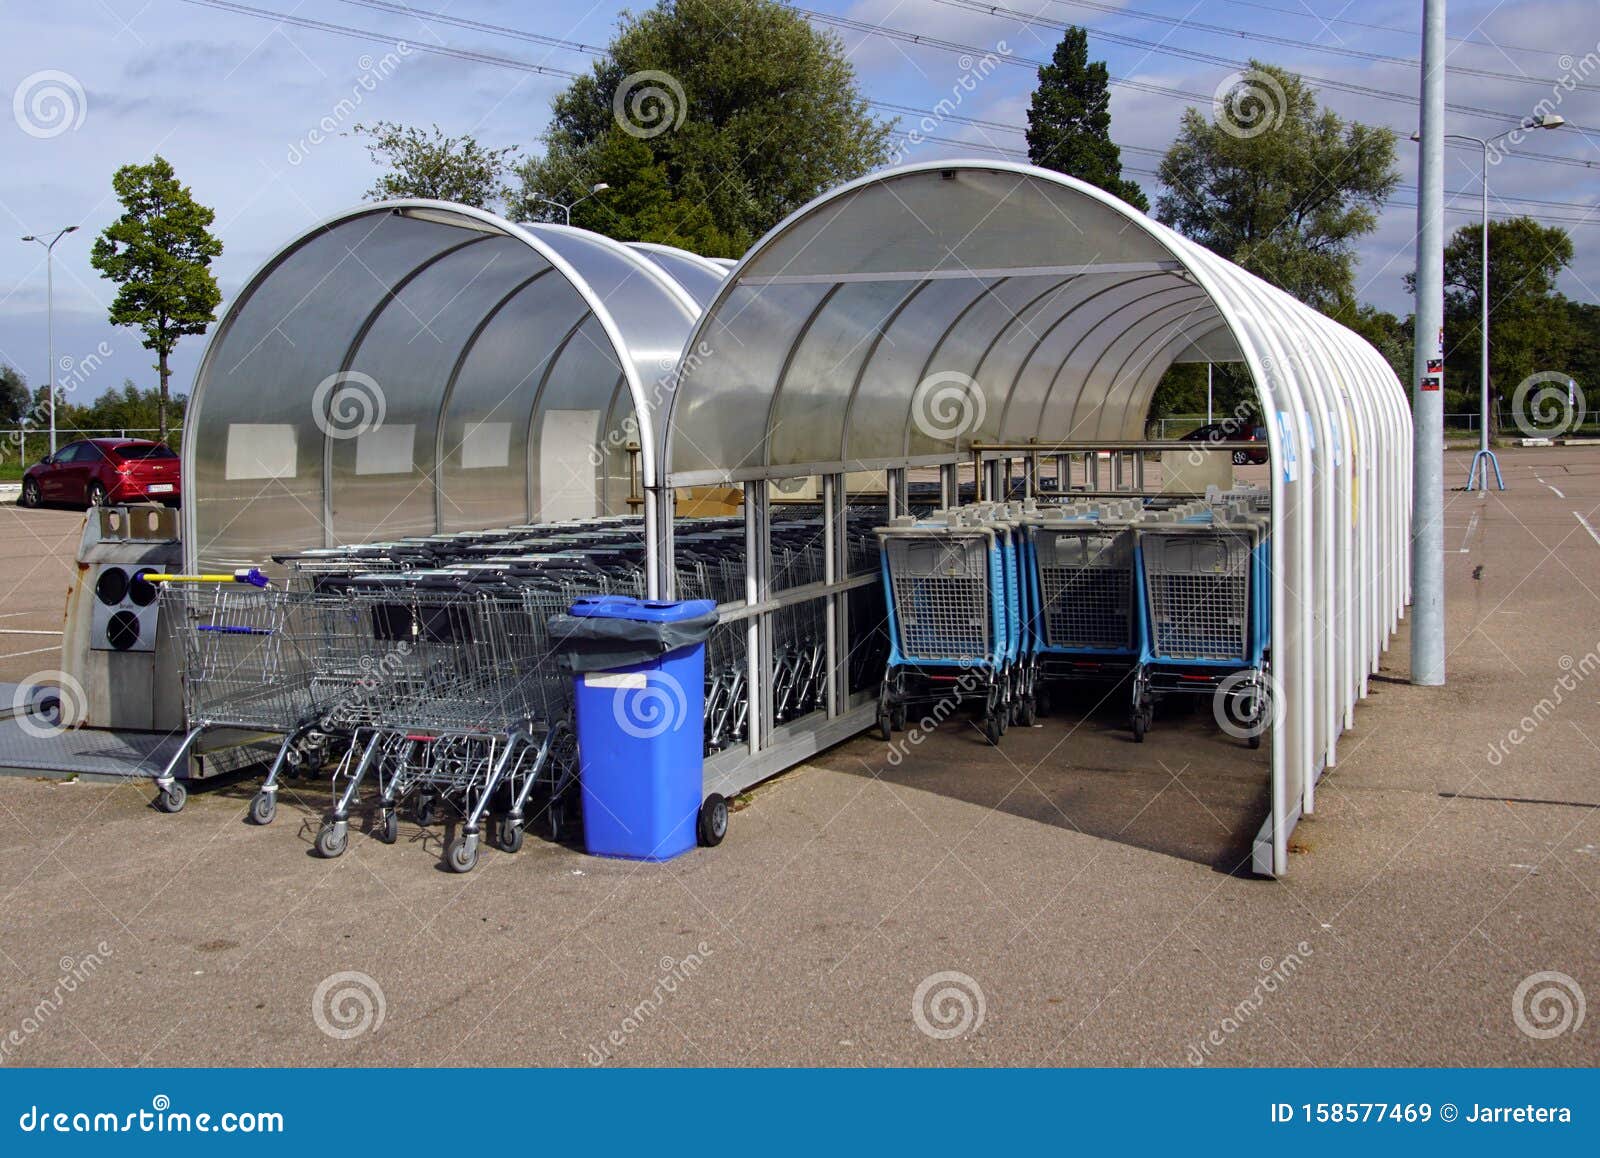 and Albert Heijn Shopping Trollies. Editorial Stock Image - Image of parking, trolly: 158577469